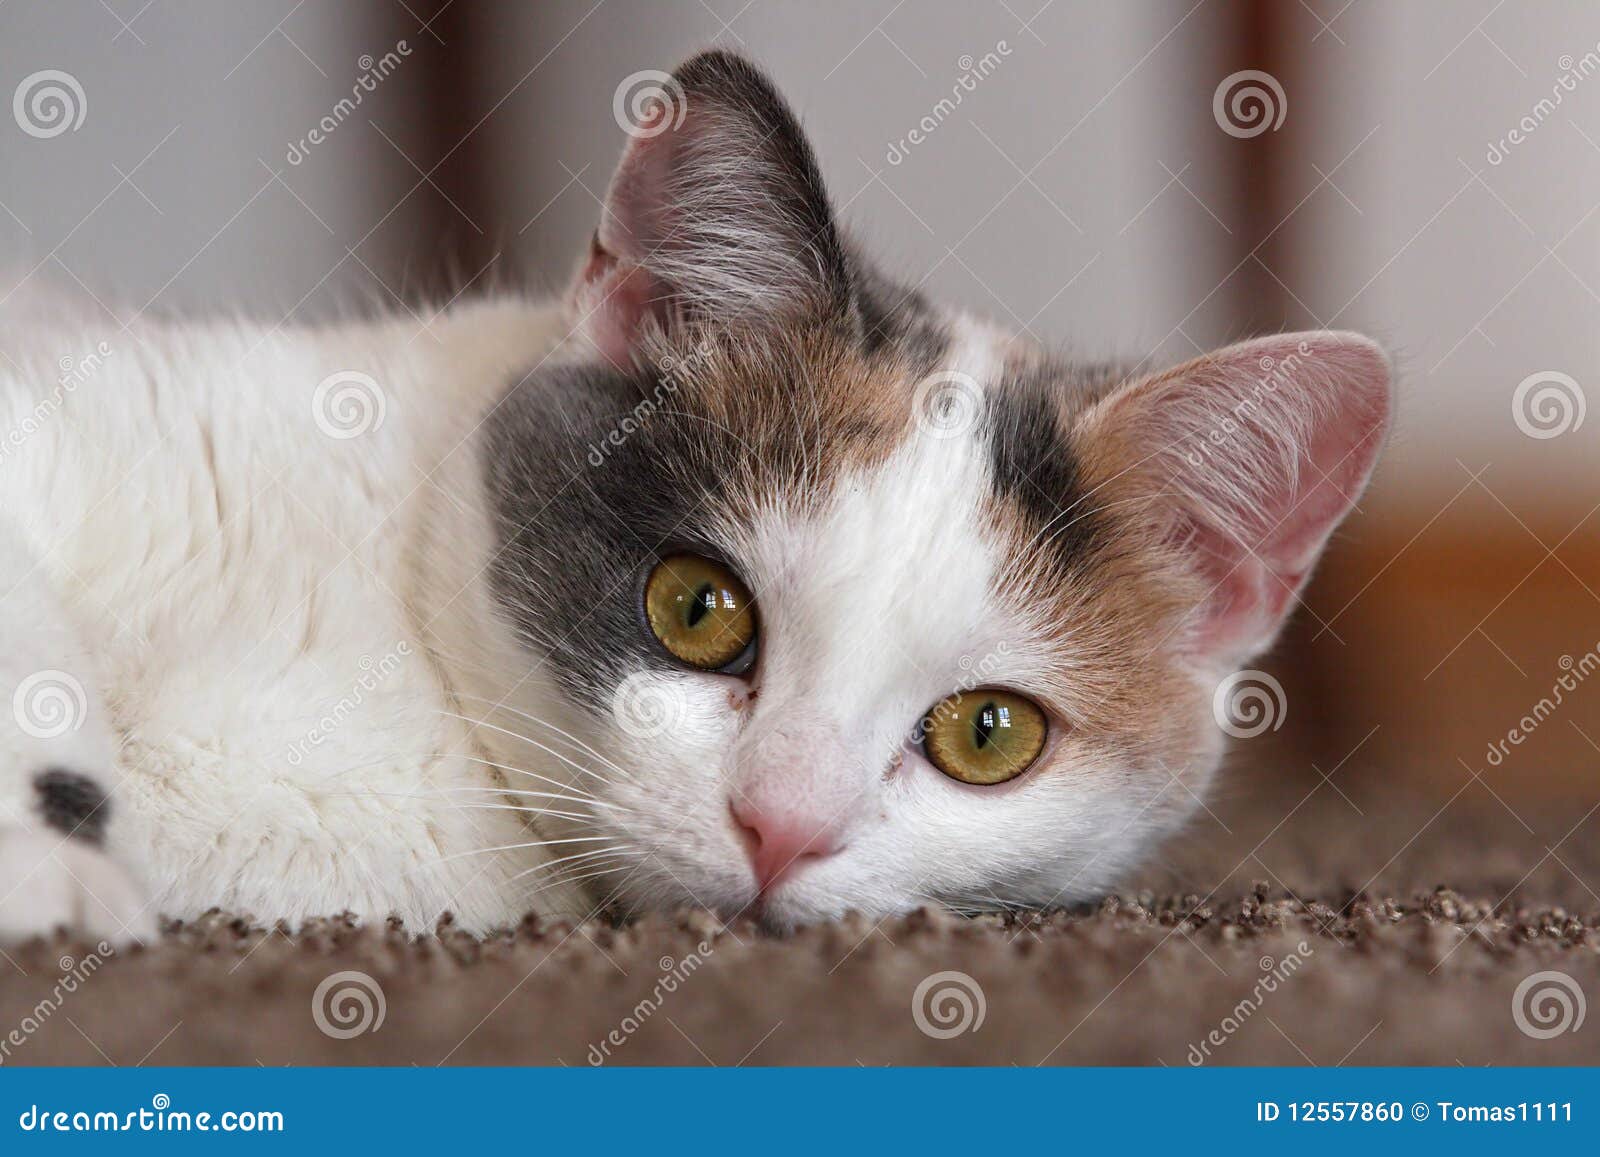 white - grey young cat